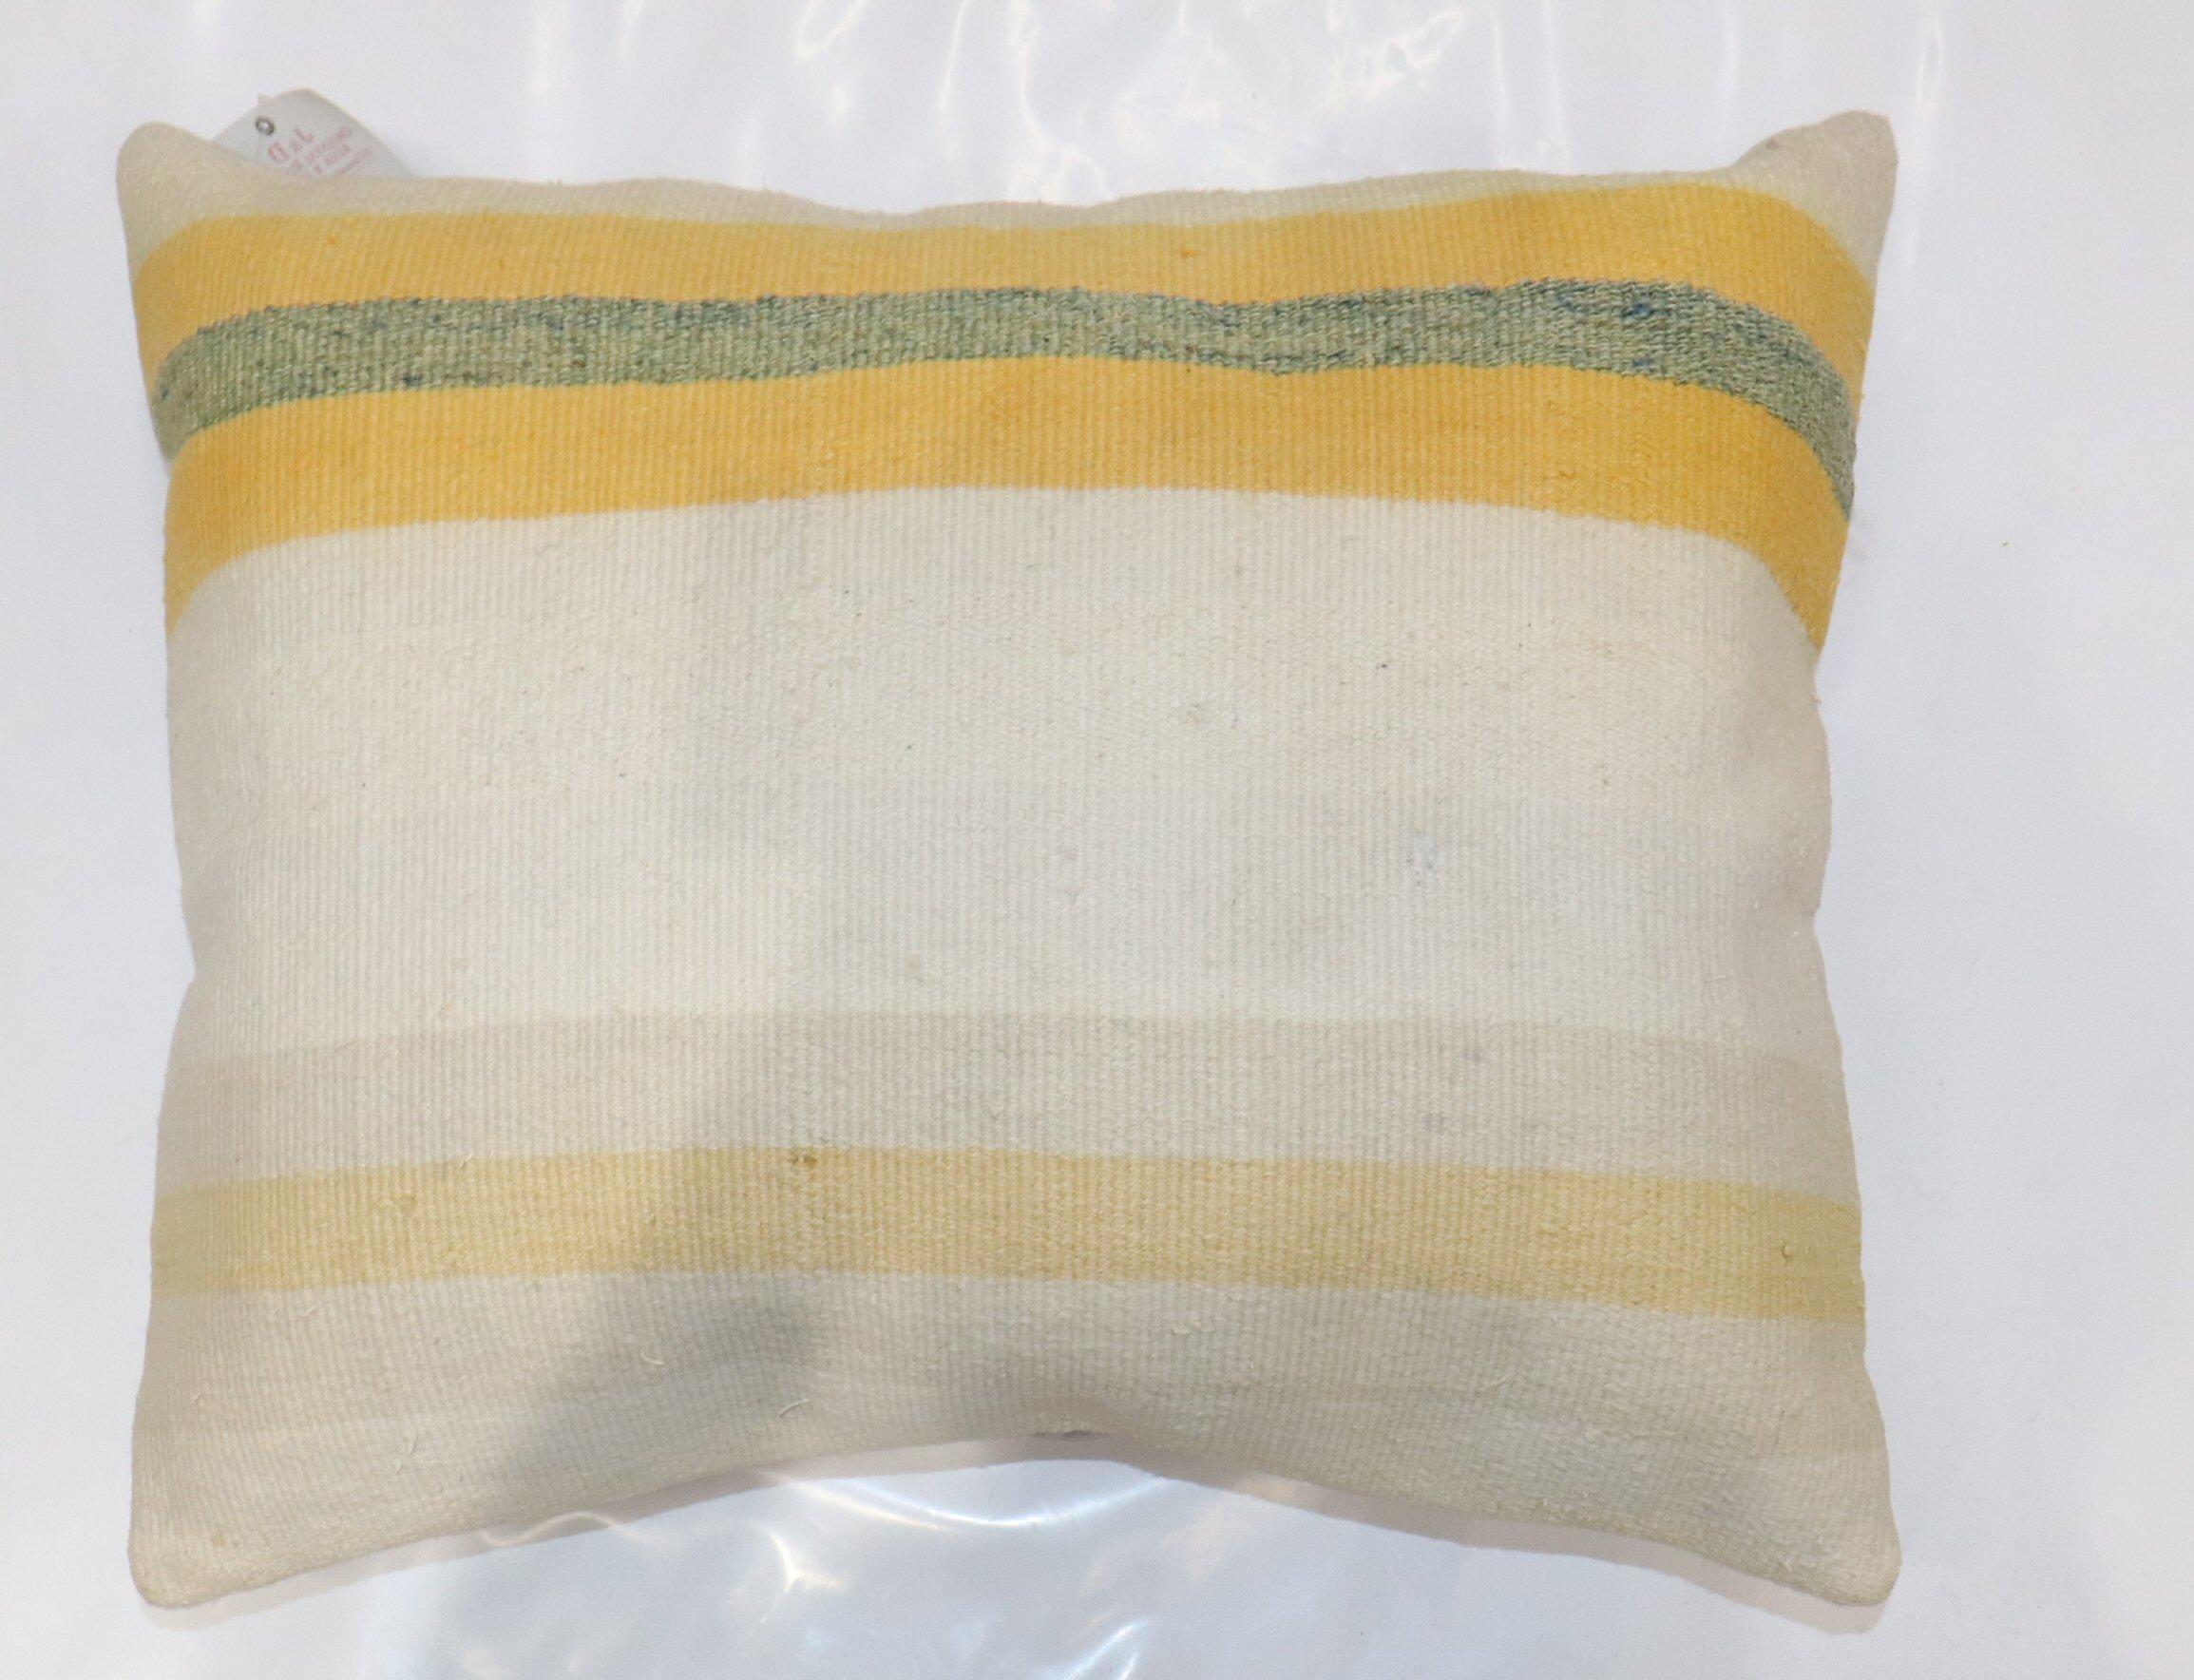 Pillow made from modern Turkish Kilim with a striped motif.

Measures: 19